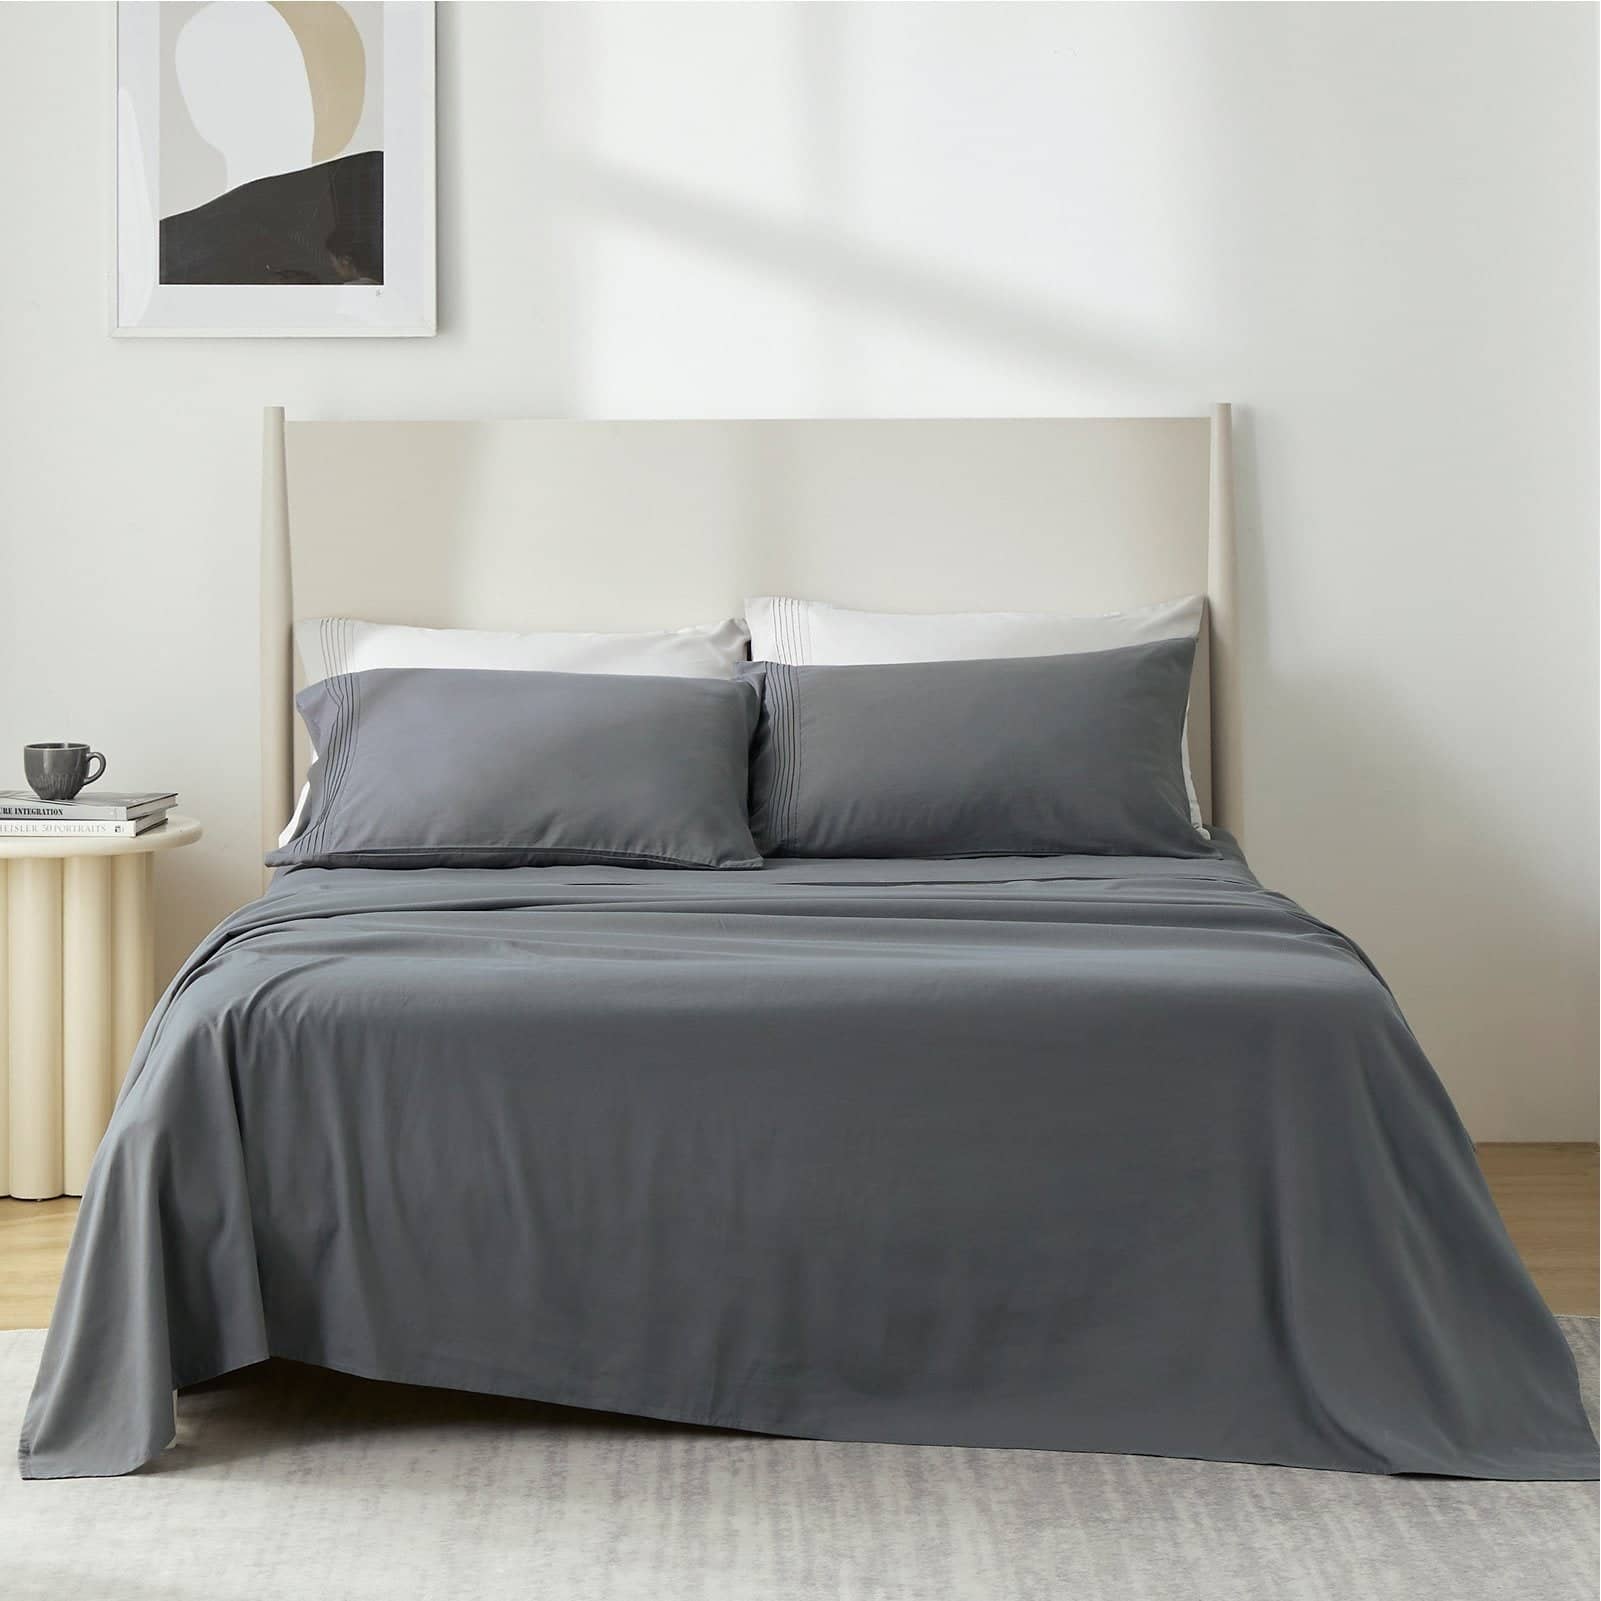 Bedsure Queen Sheets Set Grey - Soft Bed Sheets for Queen Size Bed